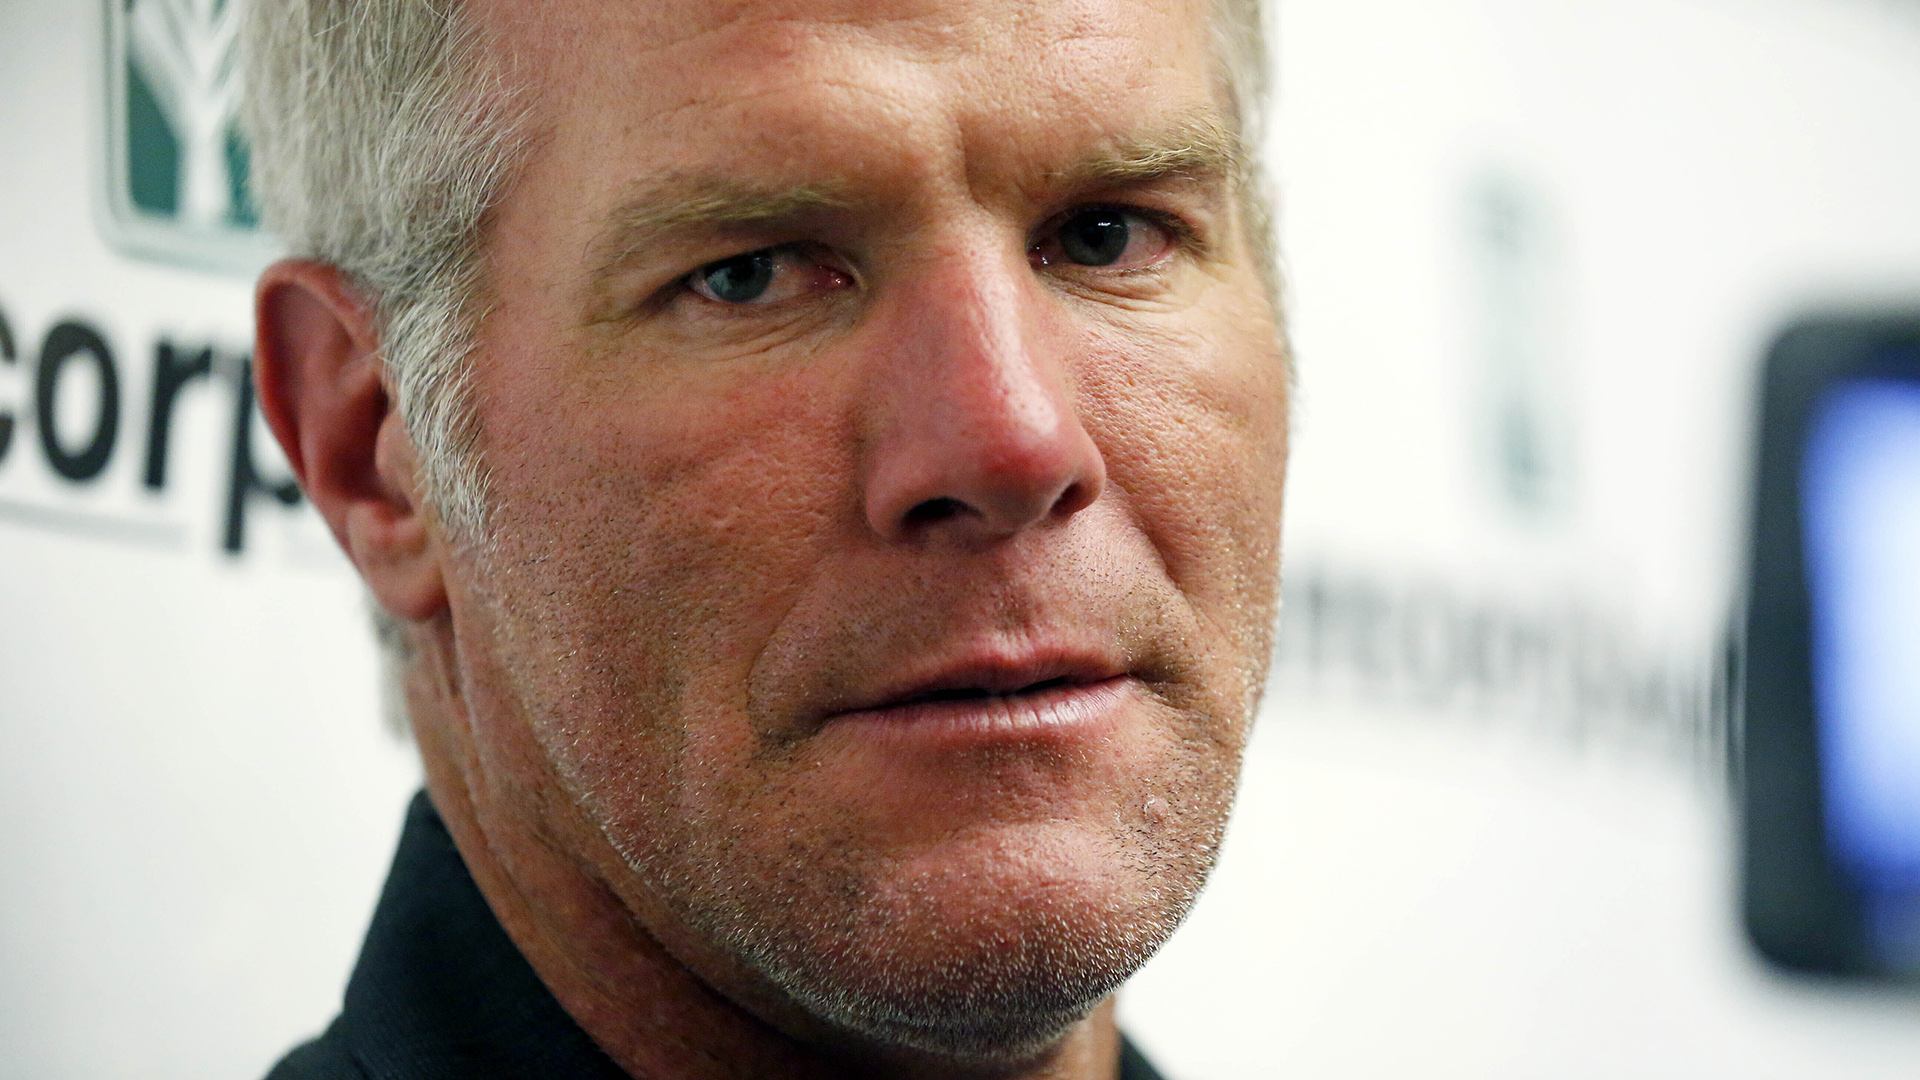 What's the deal with Brett Favre and the Mississippi welfare scandal?